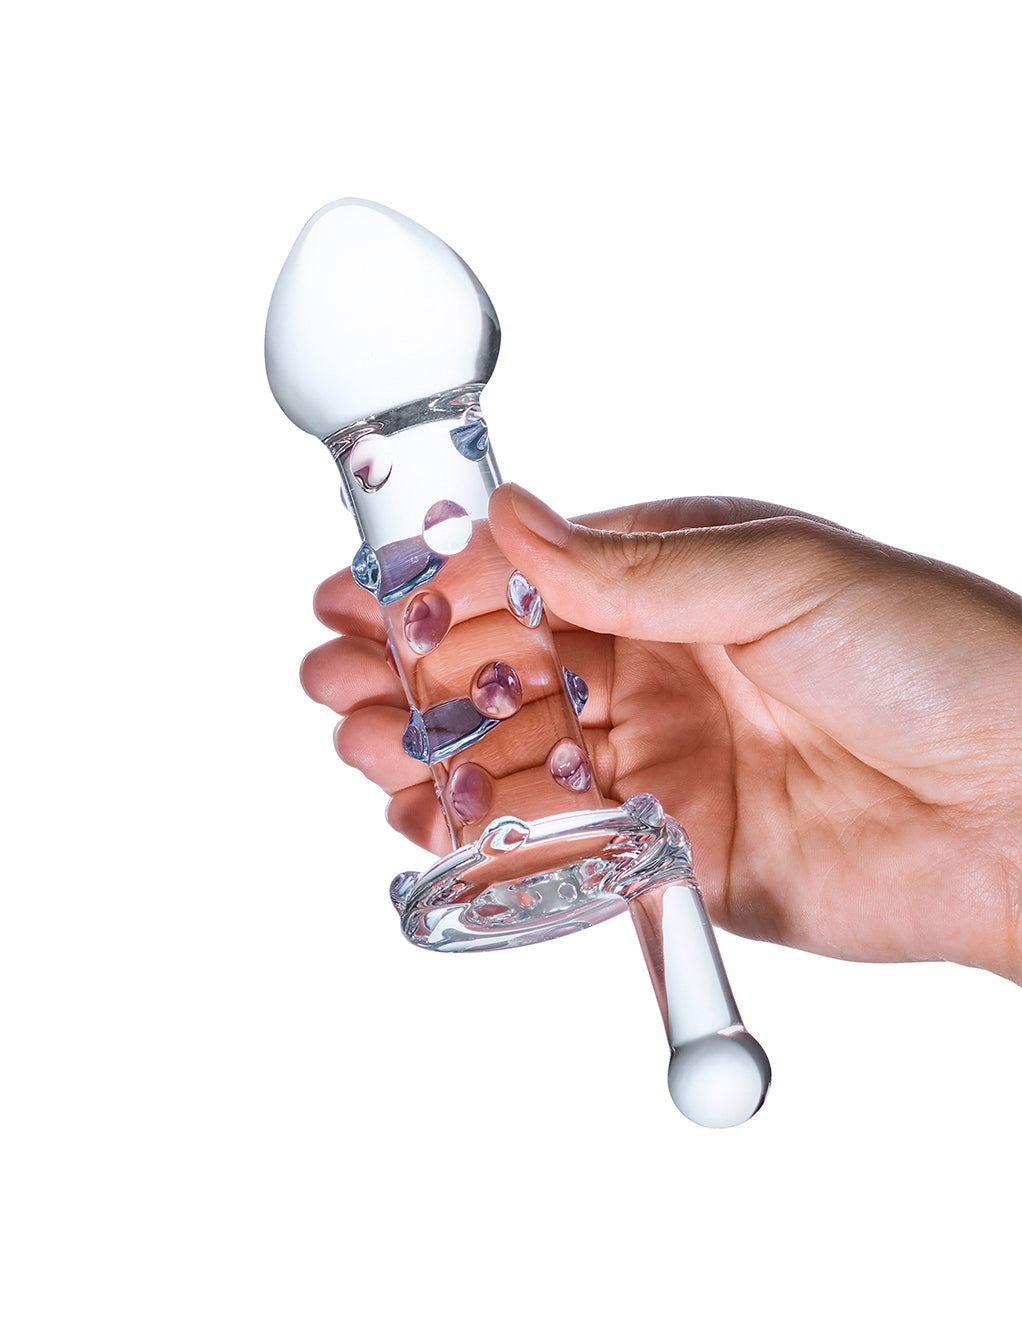 Glas 6.5" Candy Land Juicer- In hand